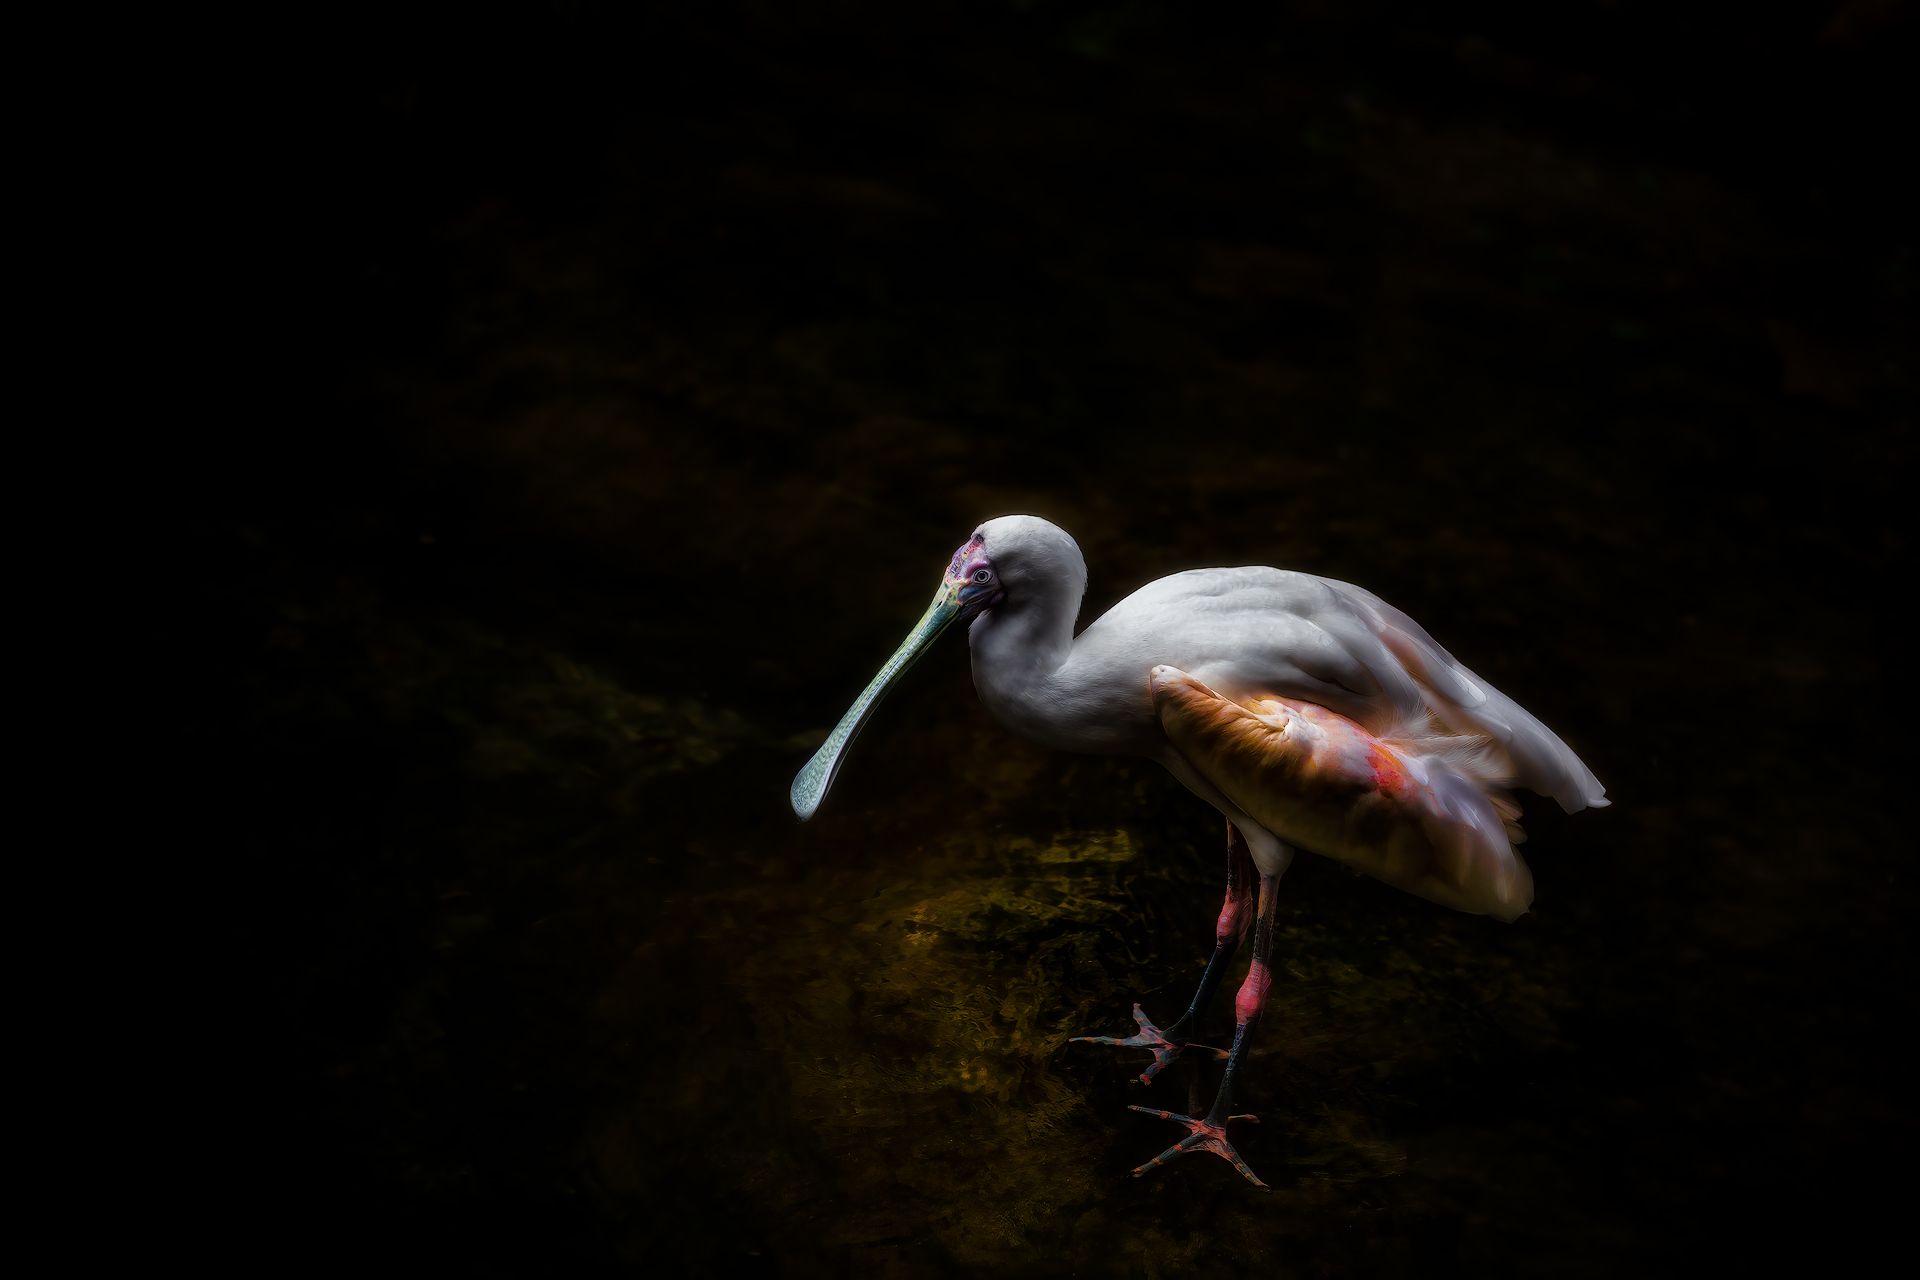 wildlife, animal, nature, lifestyle, outdoor, lonely, loneliness, spoonbill, water, bird, feather, zoo, safari, Zhao Huapu